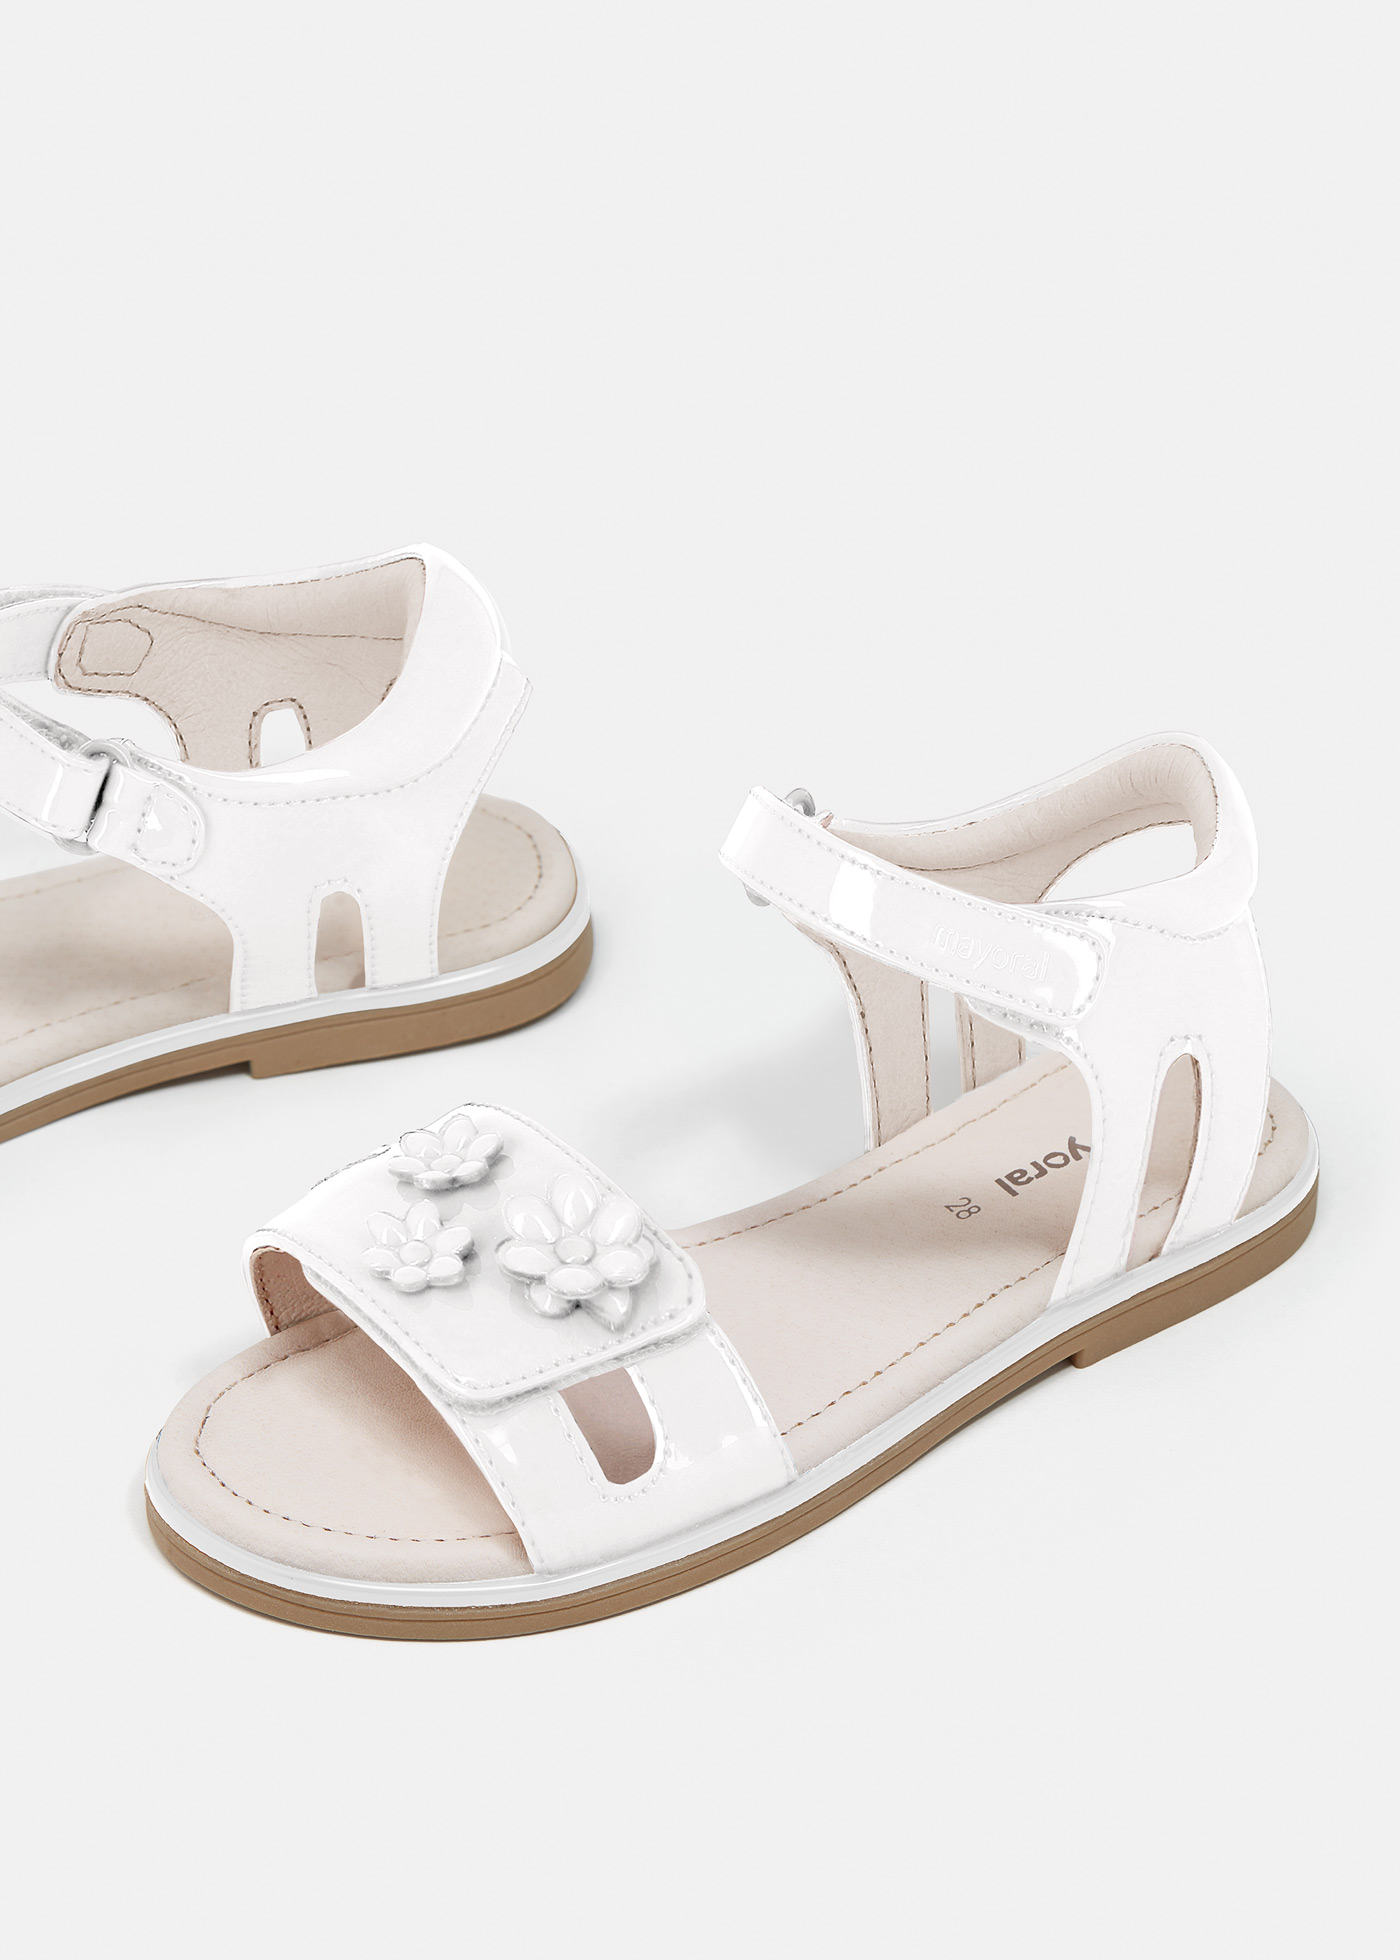 Buy Girls White Casual Sandals Online | SKU: 57-5026-16-20-Metro Shoes